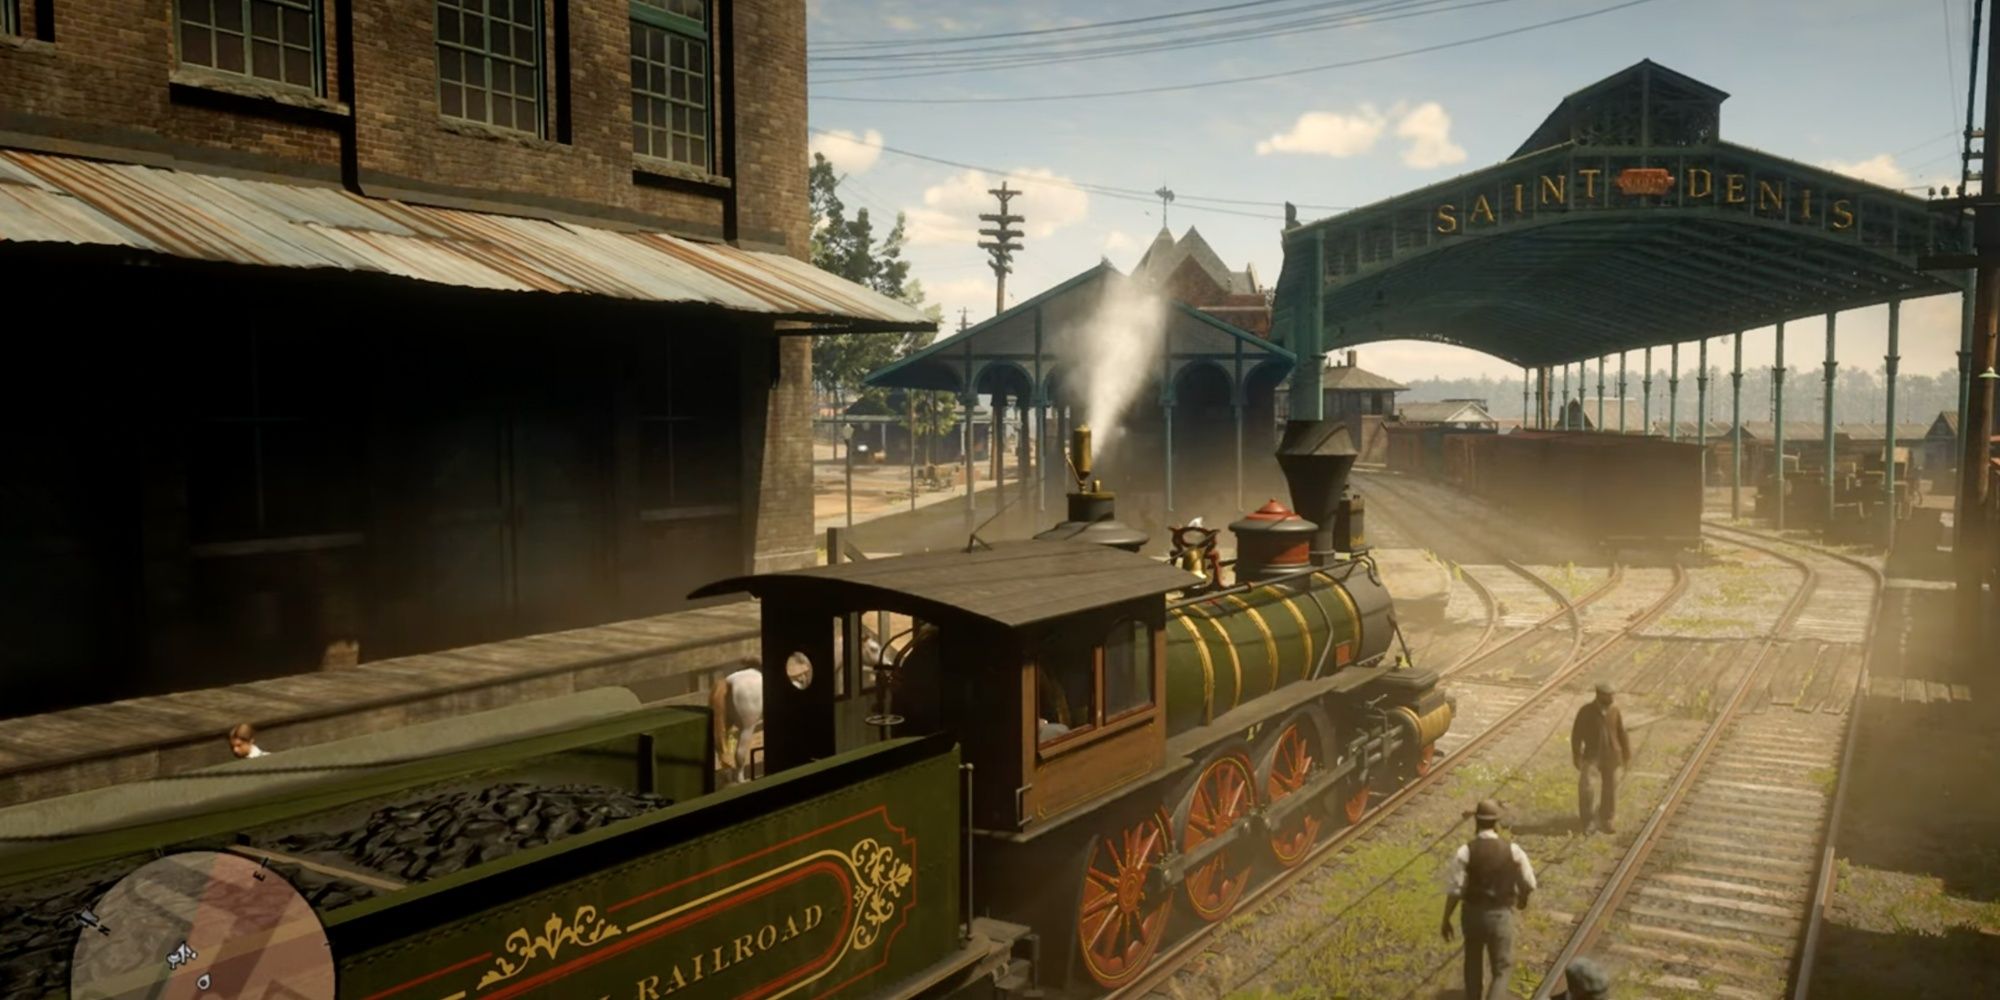 A Locomotive At a Station in Red Dead Redemption 2